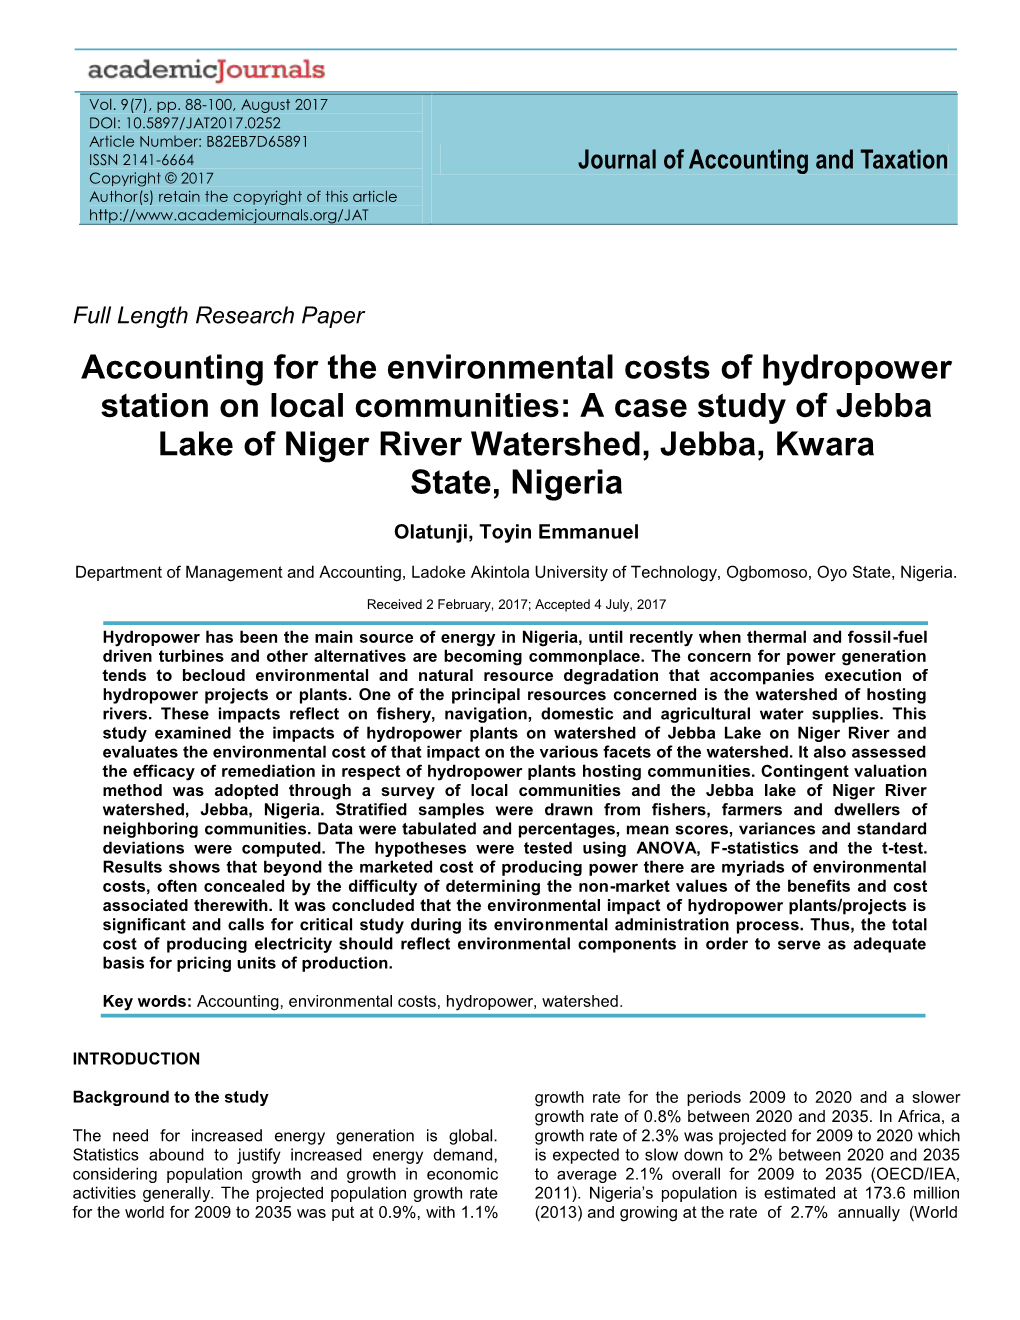 Accounting for the Environmental Costs of Hydropower Station on Local Communities: a Case Study of Jebba Lake of Niger River Watershed, Jebba, Kwara State, Nigeria